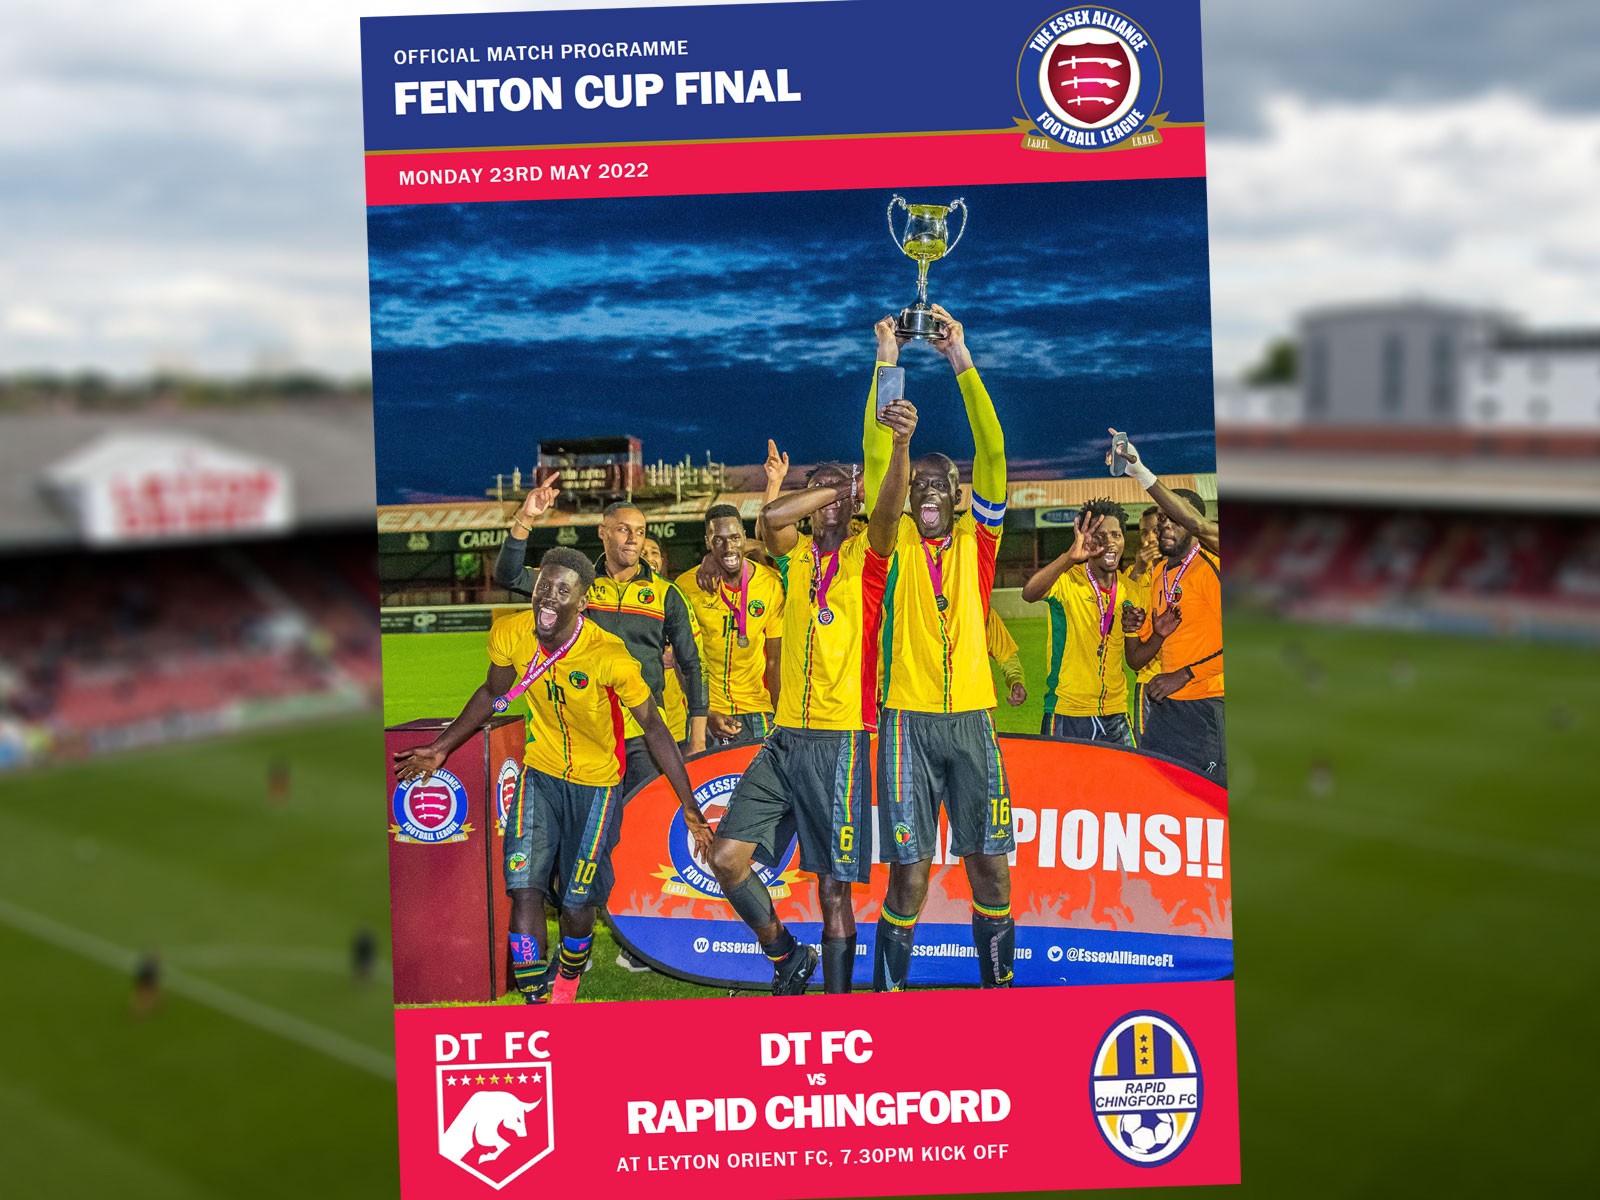 DT FC and Rapid Chingford in Fenton Cup Final action this Monday night